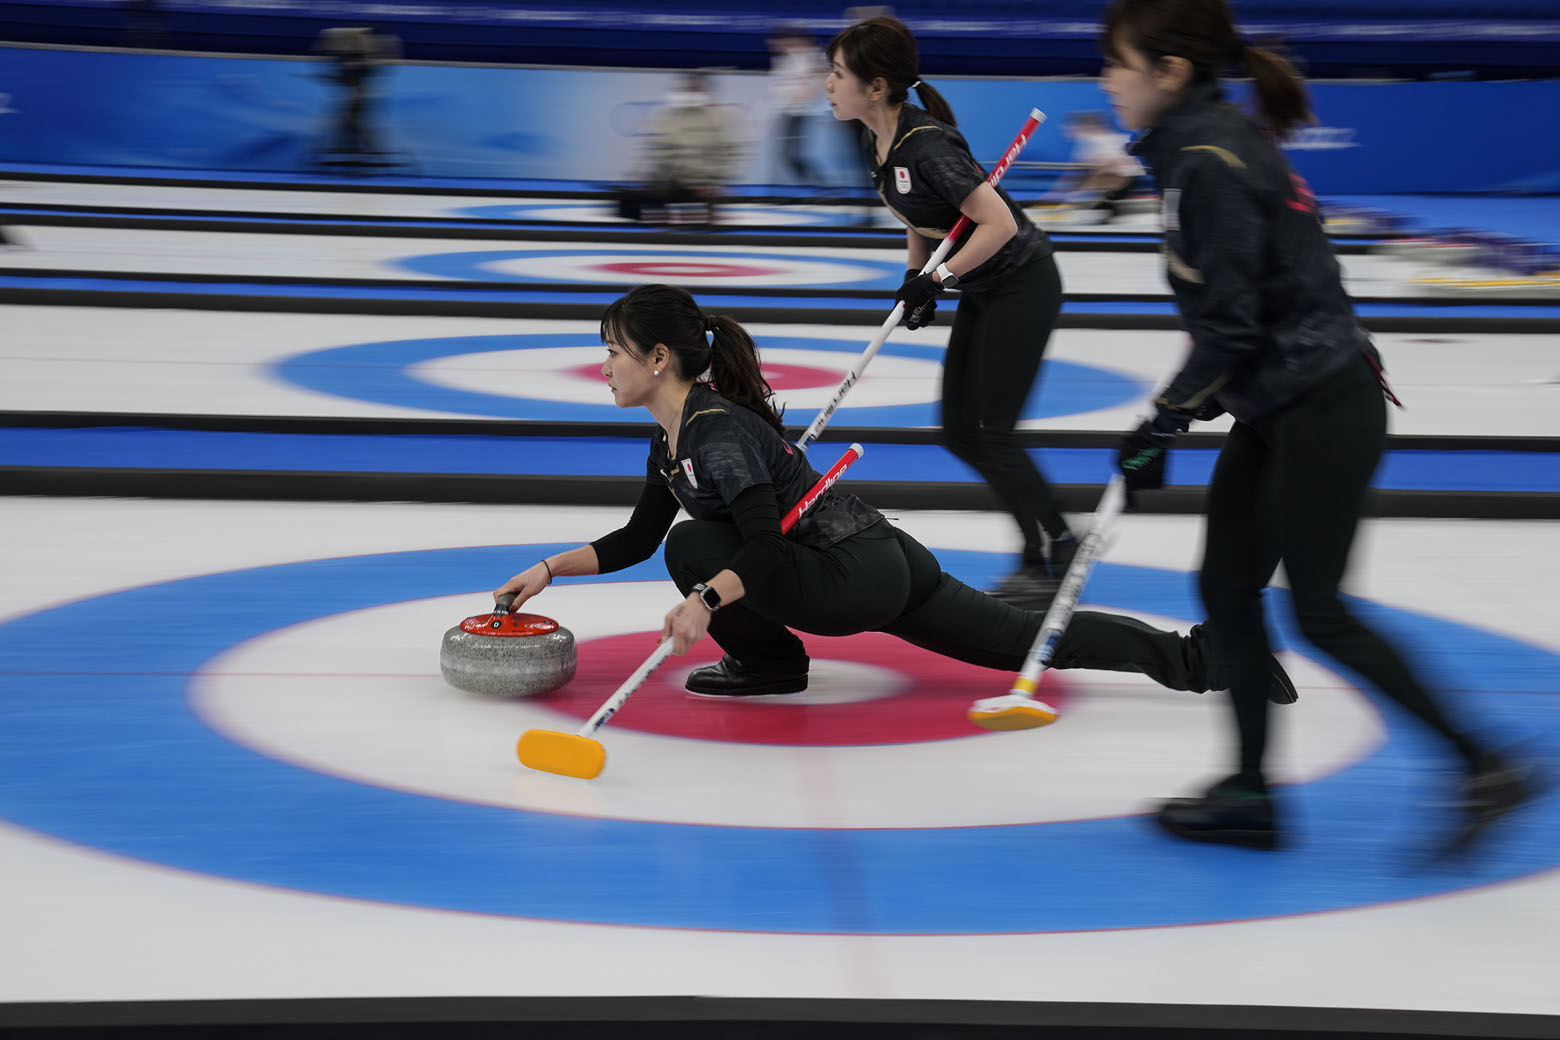 <p>Japan&#8217;s Chinami Yoshida throws a rock during a women&#8217;s curling match against Denmark at the Beijing Winter Olympics Saturday, Feb. 12, 2022, in Beijing.</p>
